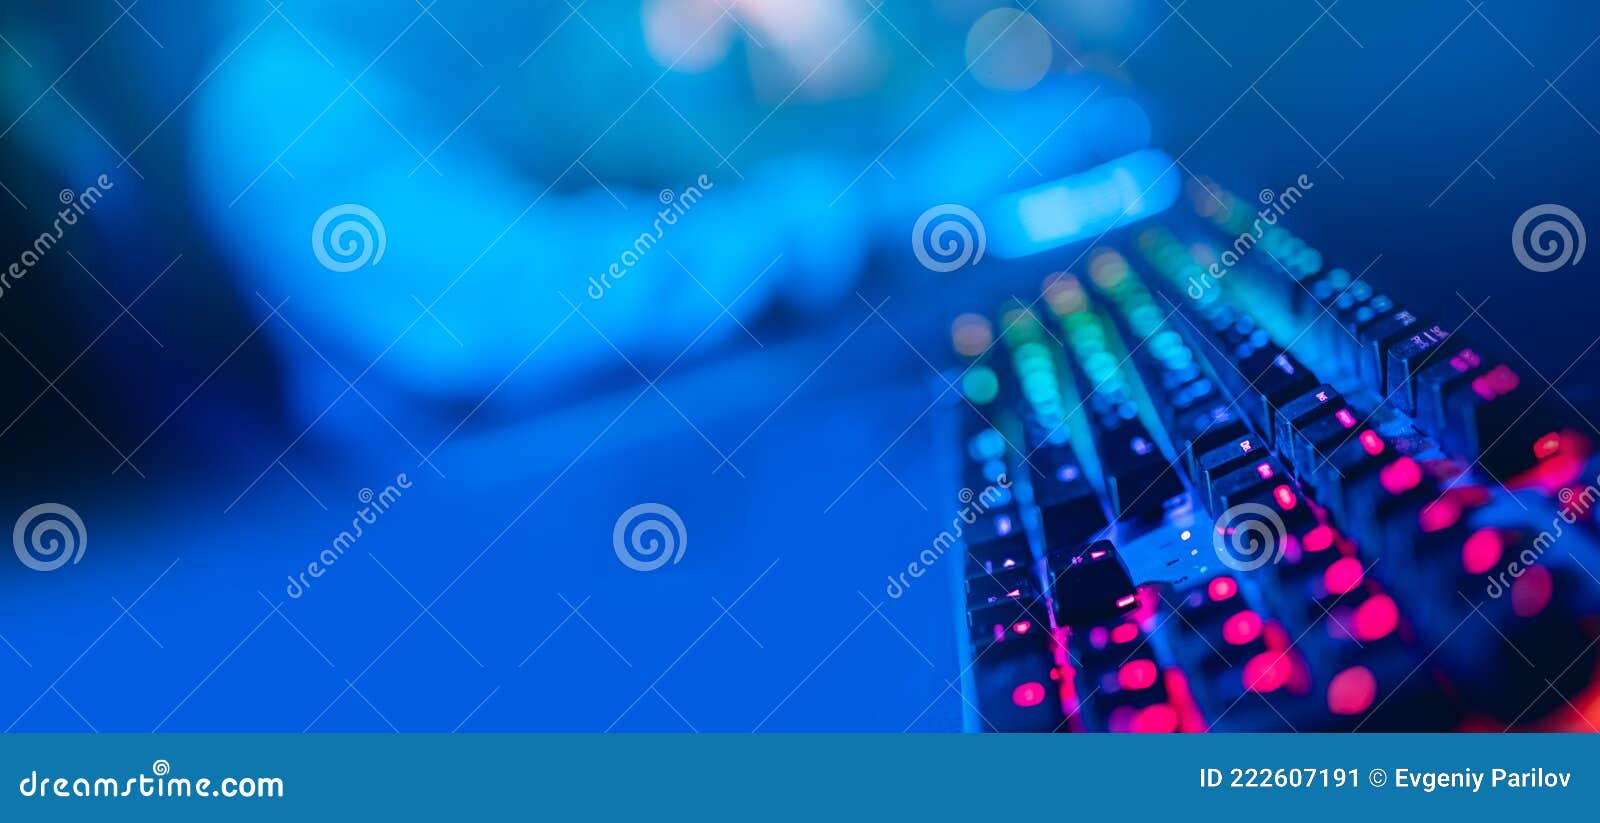 Banner Blur Background Keyboard Professional Cyber Gamer Studio Room with  Neon Color, Soft Focus Stock Image - Image of stream, studio: 222607191